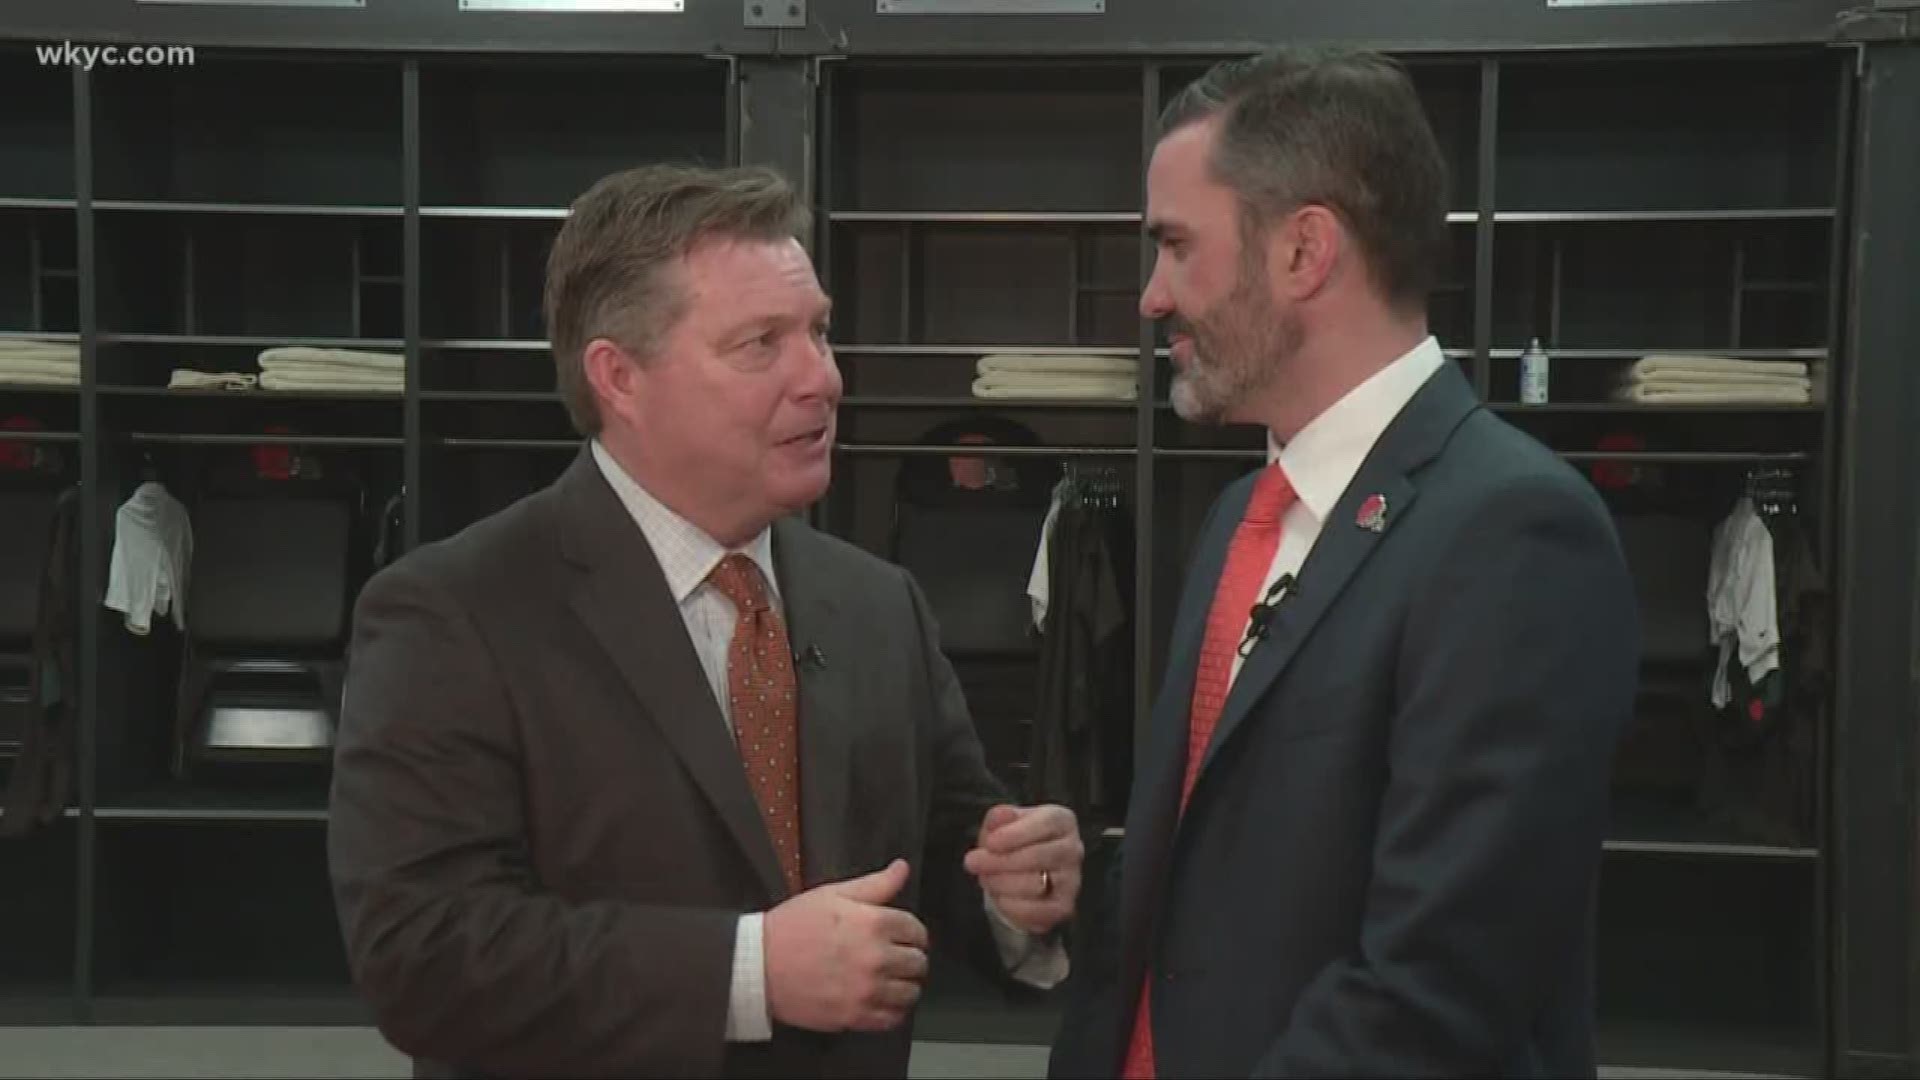 The Cleveland Browns officially introduced Kevin Stefanski as head coach Tuesday. Jim Donovan sat down with Stefanski to hear his thoughts on the upcoming season.